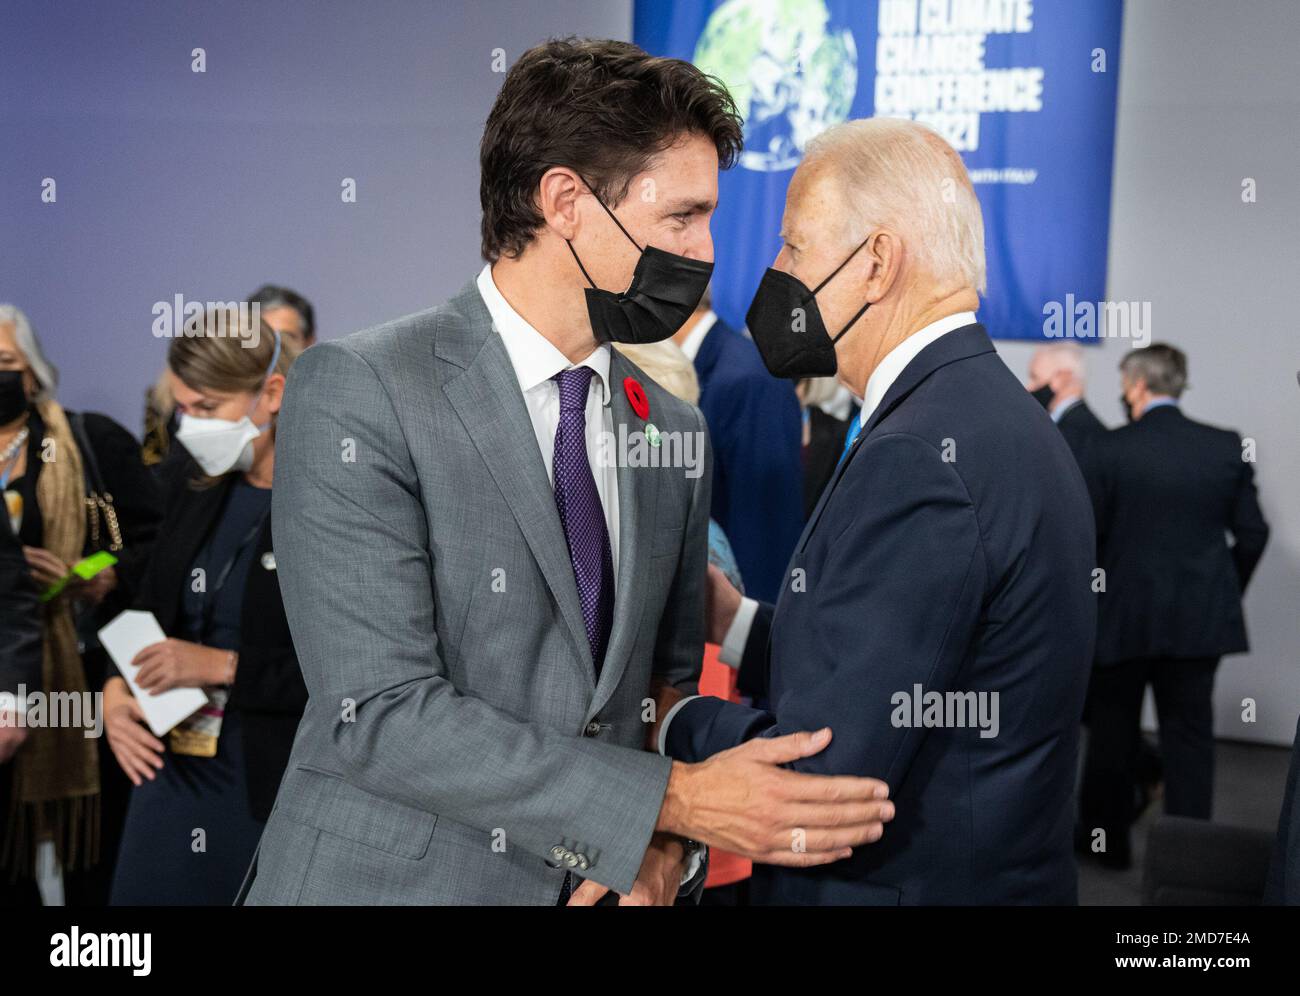 Reportage: President Joe Biden greets Canadian Prime Minister Justin Trudeau at the Build Back Better World initiative, Tuesday, November 2, 2021, during the COP26 U.N. Climate Change Conference at the Scottish Event Campus Stock Photo